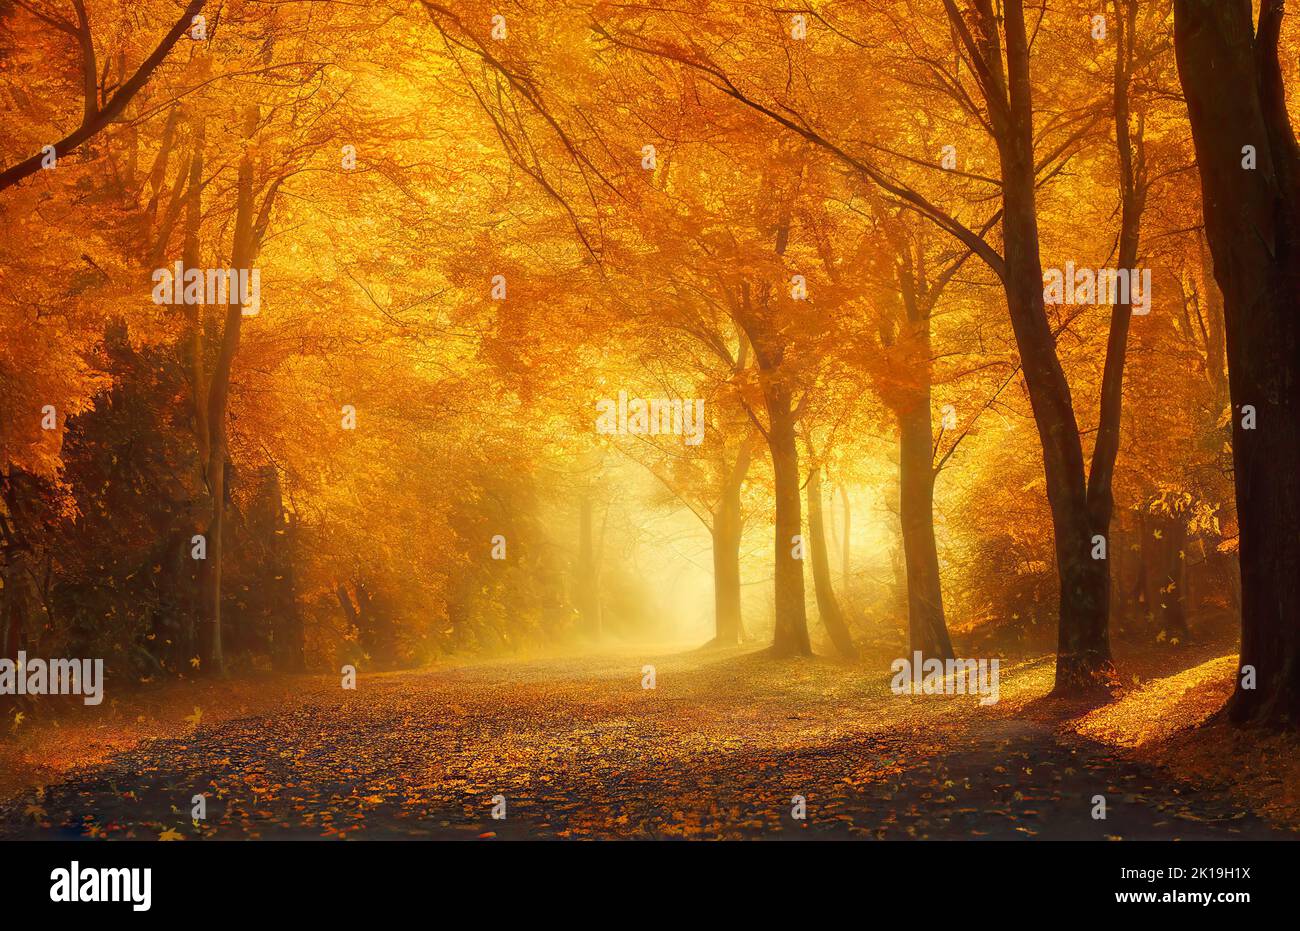 Golden trees along an autumn park alley, misty day, falling leaves. Digital illustration based on render by neural network Stock Photo